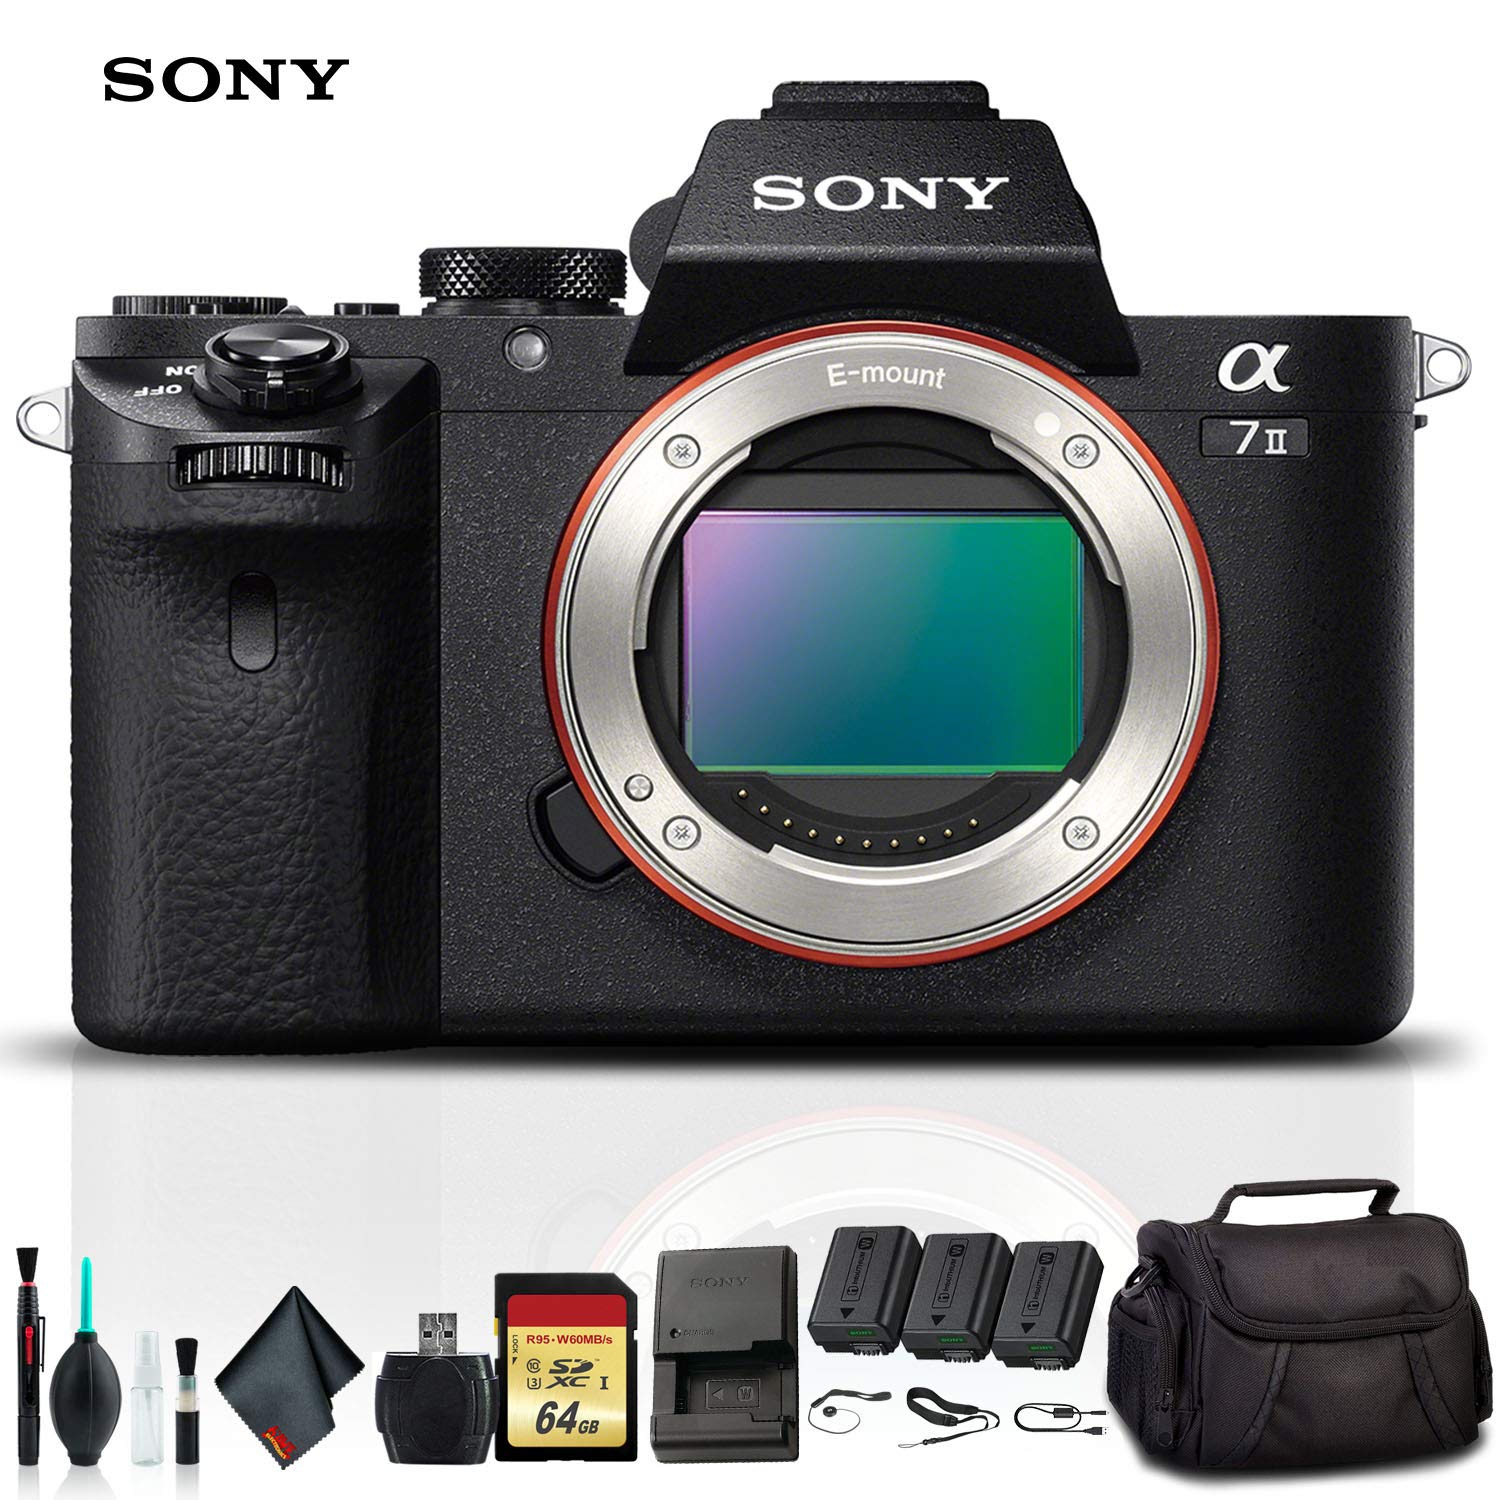 Sony Alpha a7 II Mirrorless Camera ILCE7M2/B with Soft Bag, Additional Battery, 64GB Memory Card, Card Reader, Plus Esse